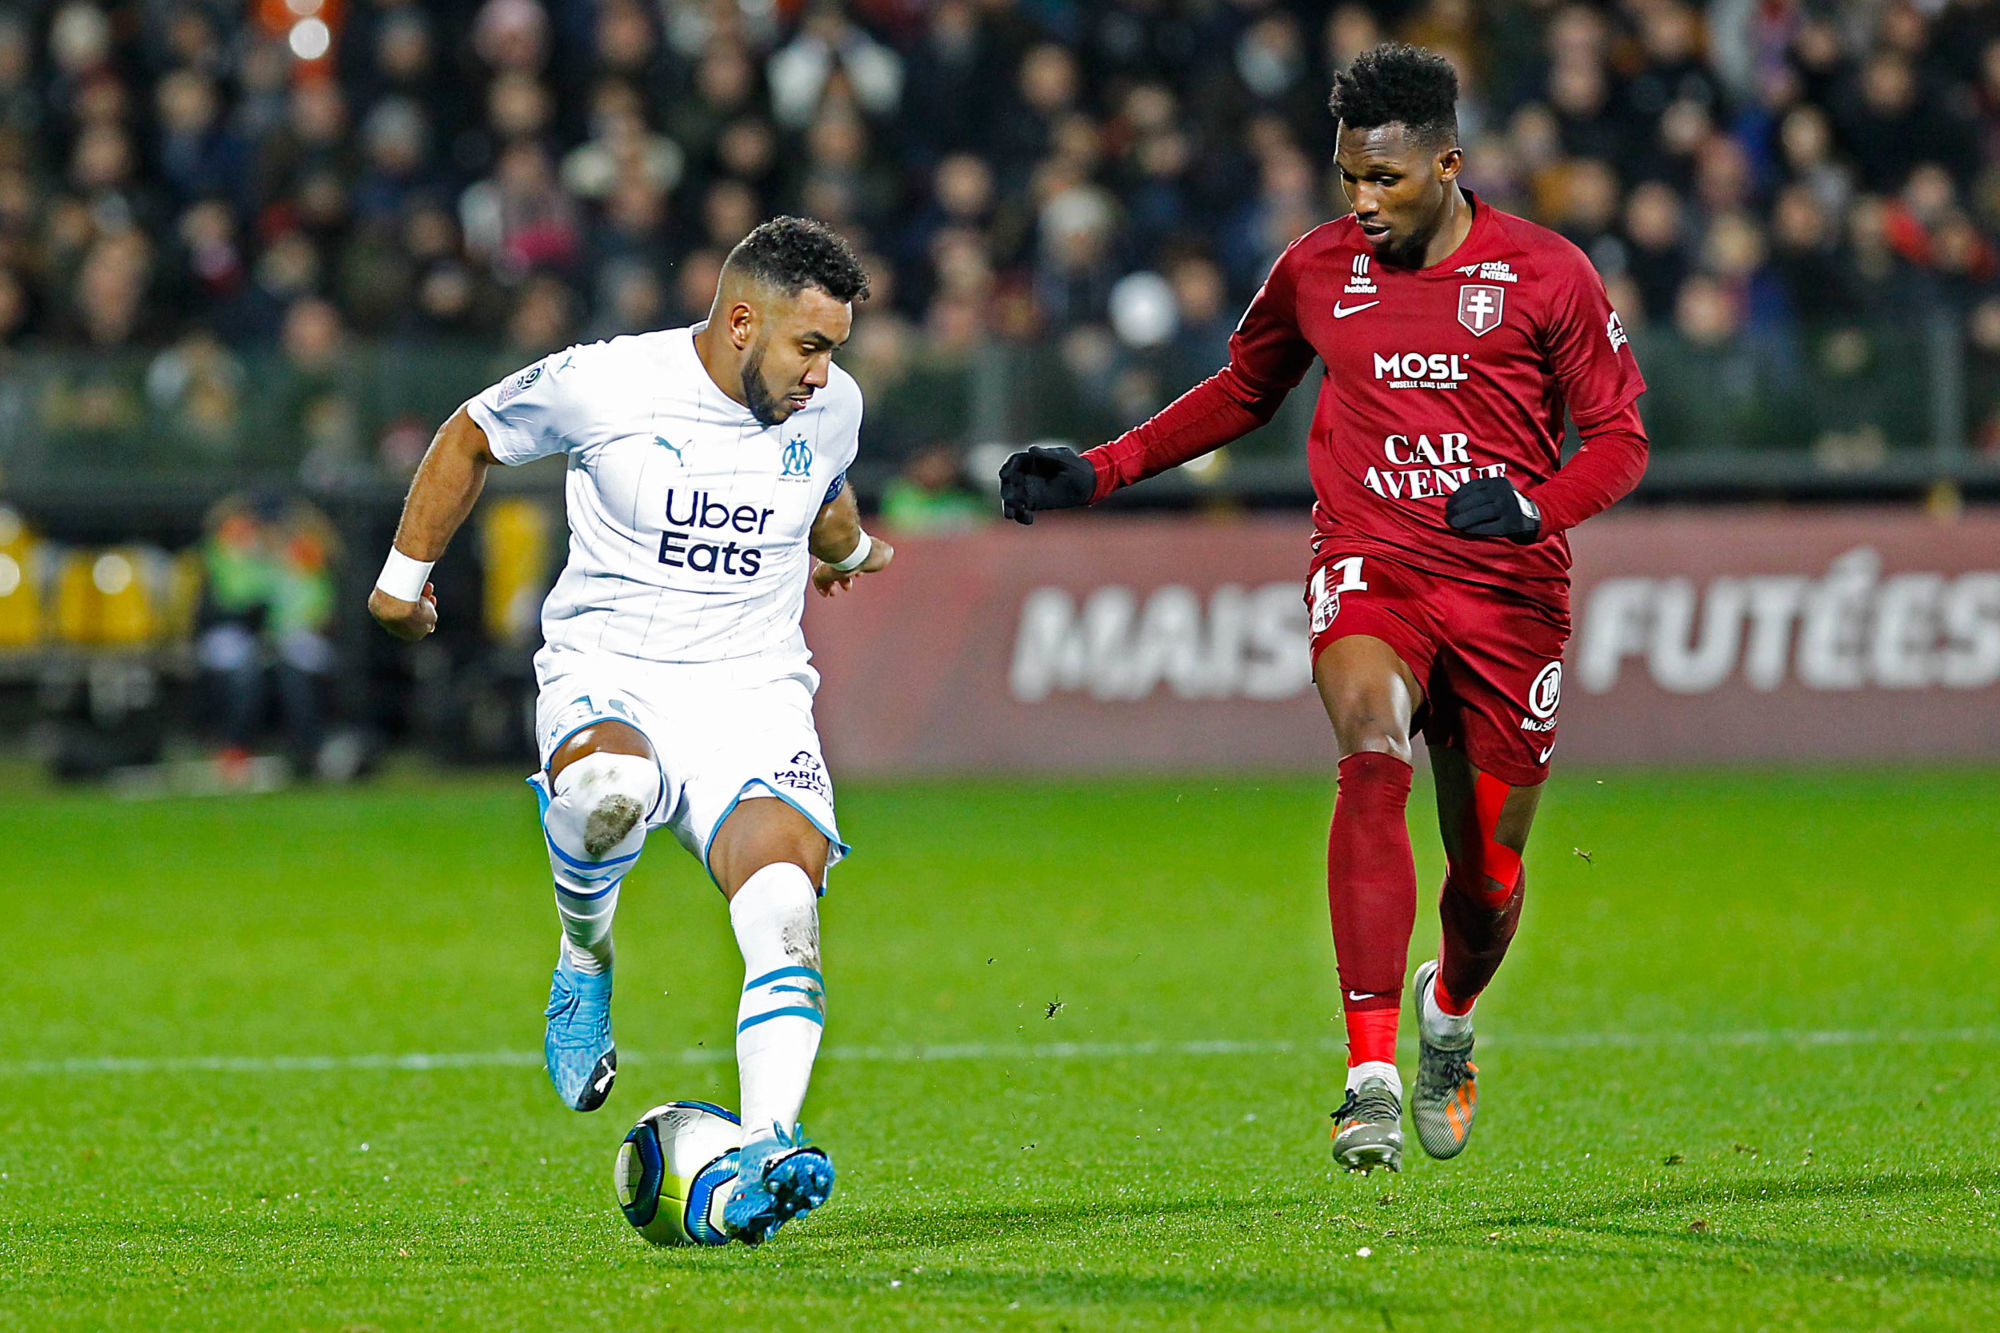 Photo by Fred Marvaux/Icon Sport - Dimitri PAYET - Opa NGUETTE - Stade Saint-Symphorien - Metz (France)